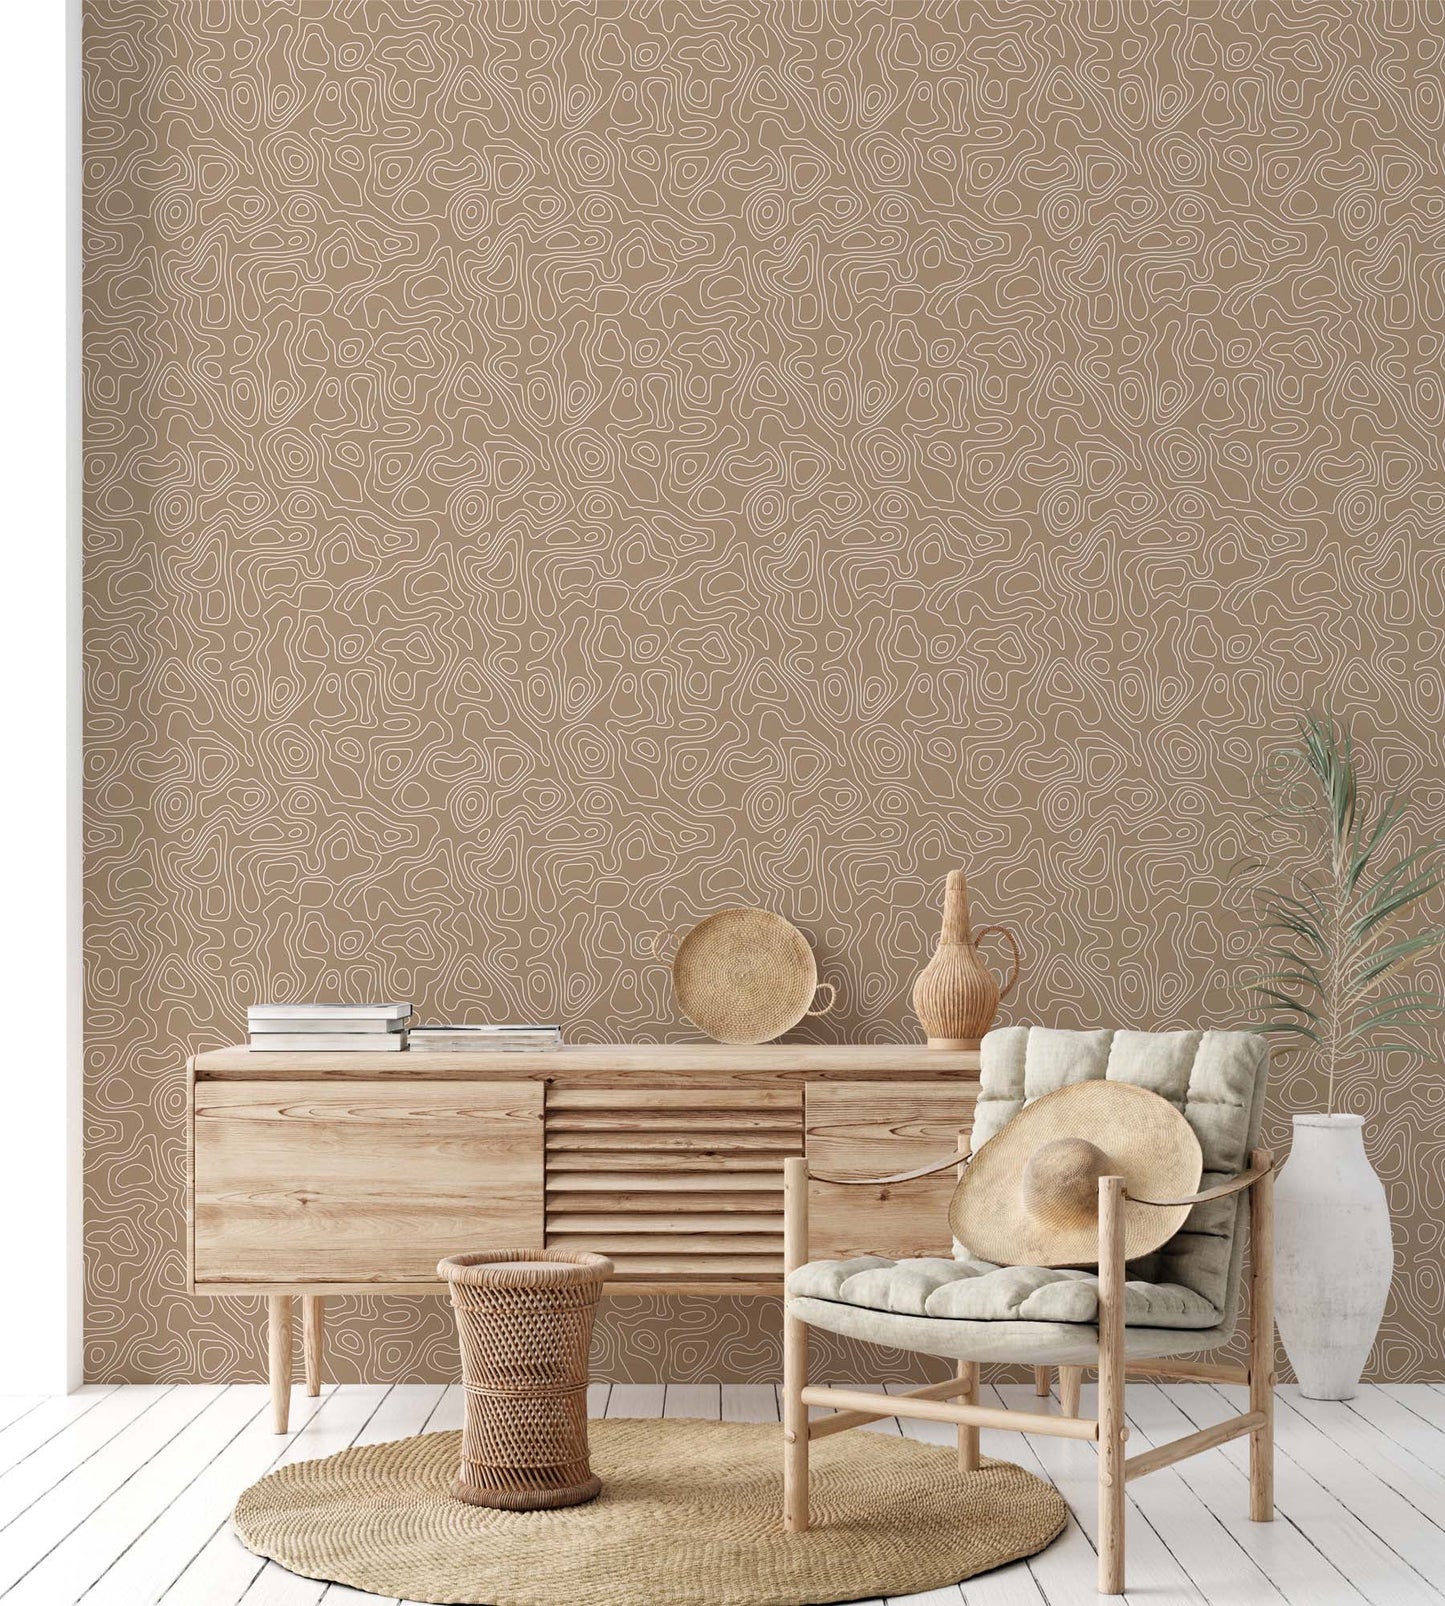 Camper van or Home Wallpaper - Abstract Topography Wallpaper for Camper or Home - Neutral Brown and White - Peel and Stick or Traditional Wallpaper